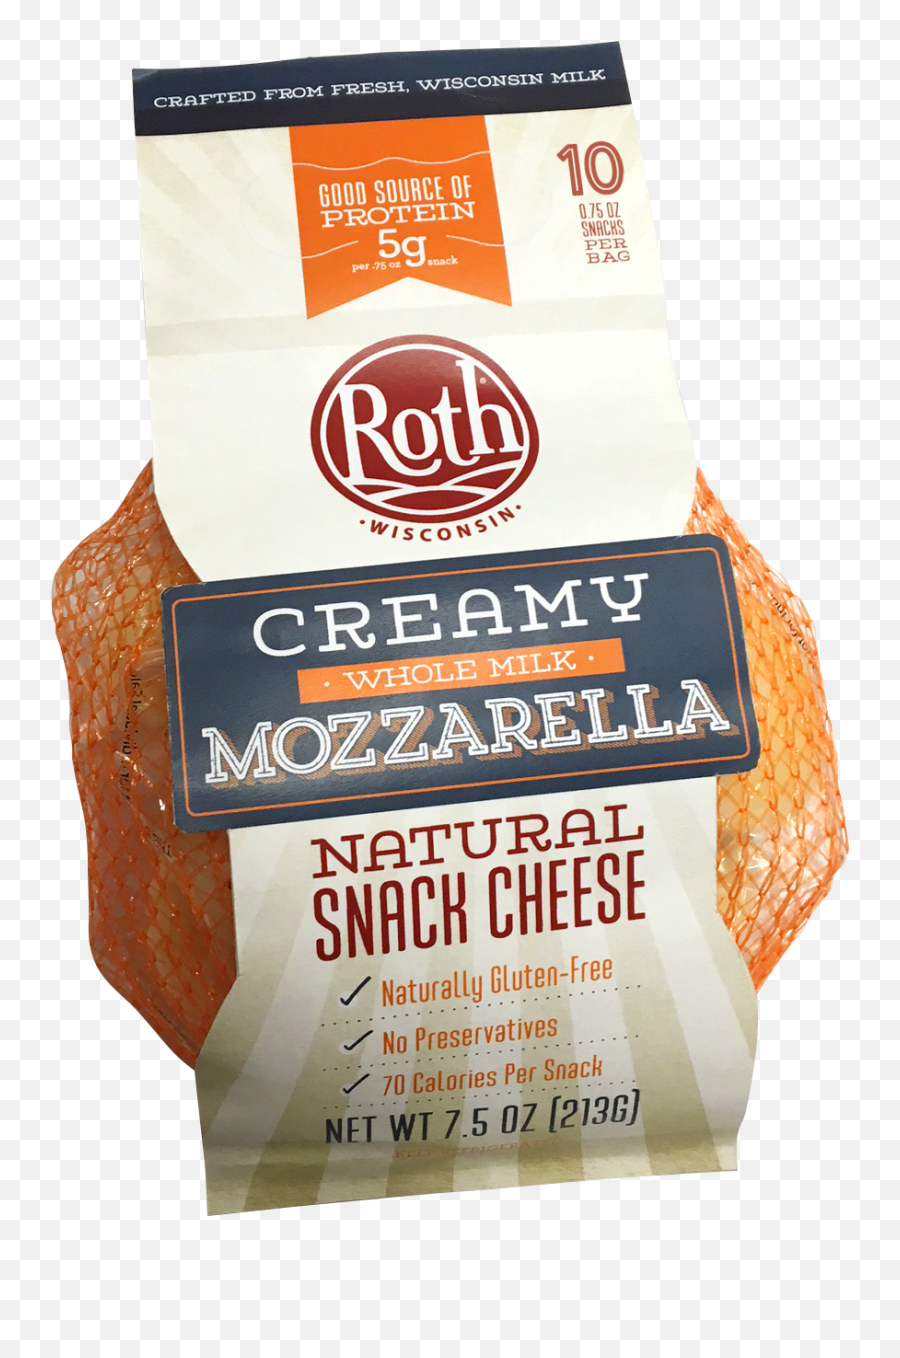 Roth Creamy Cheddar Snack Cheese Png - Packet,Snacks Png